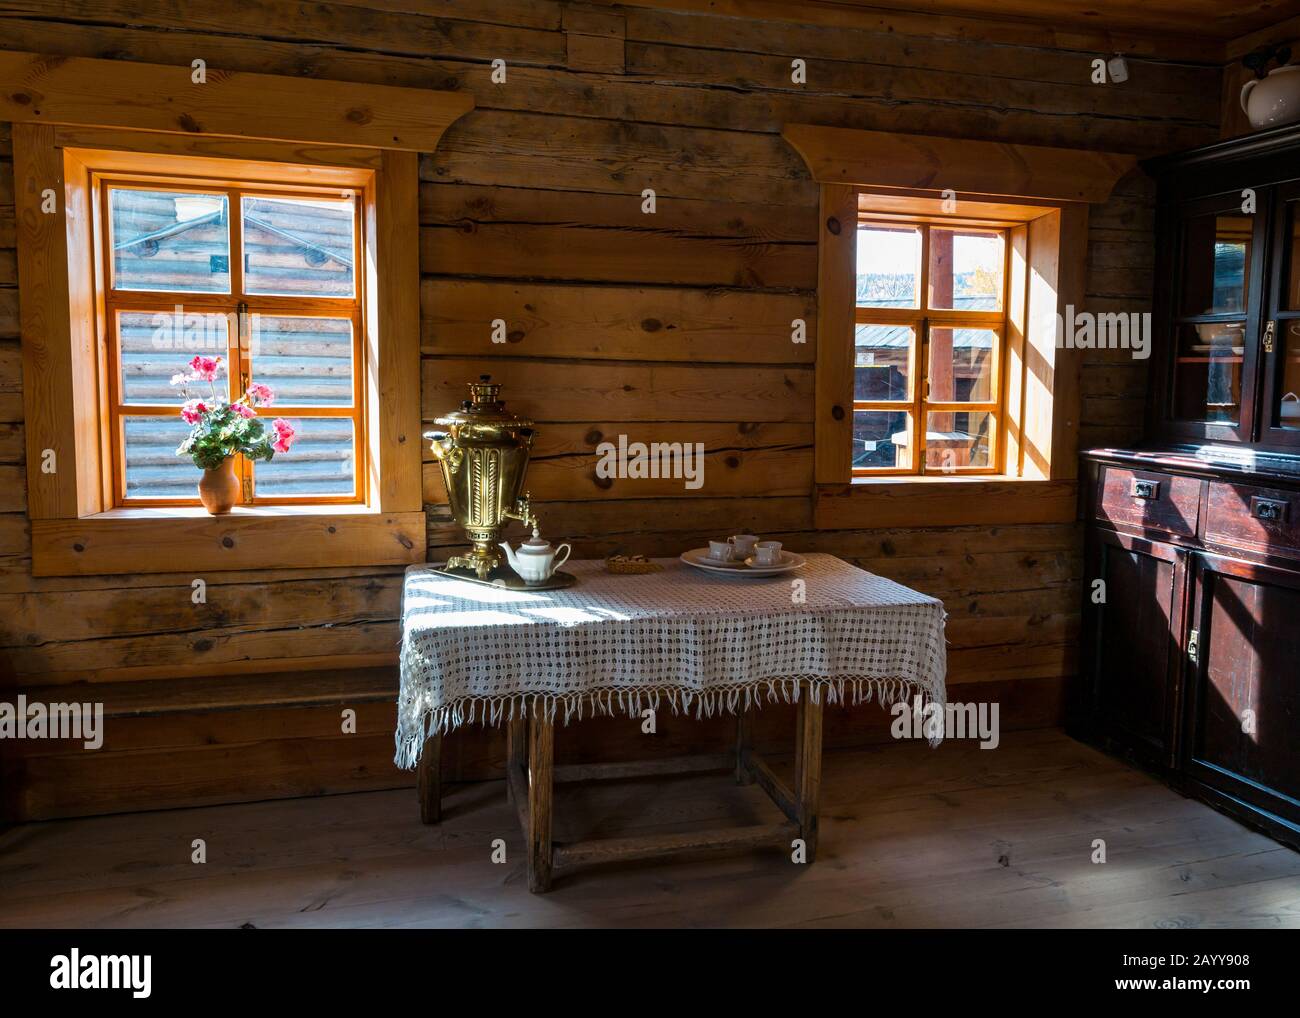 Interior of tradtional wooden house log cabin with Samovar, Taltsy Museum of Wooden Architecture, Irkutsk Region, Siberia, Russia Stock Photo